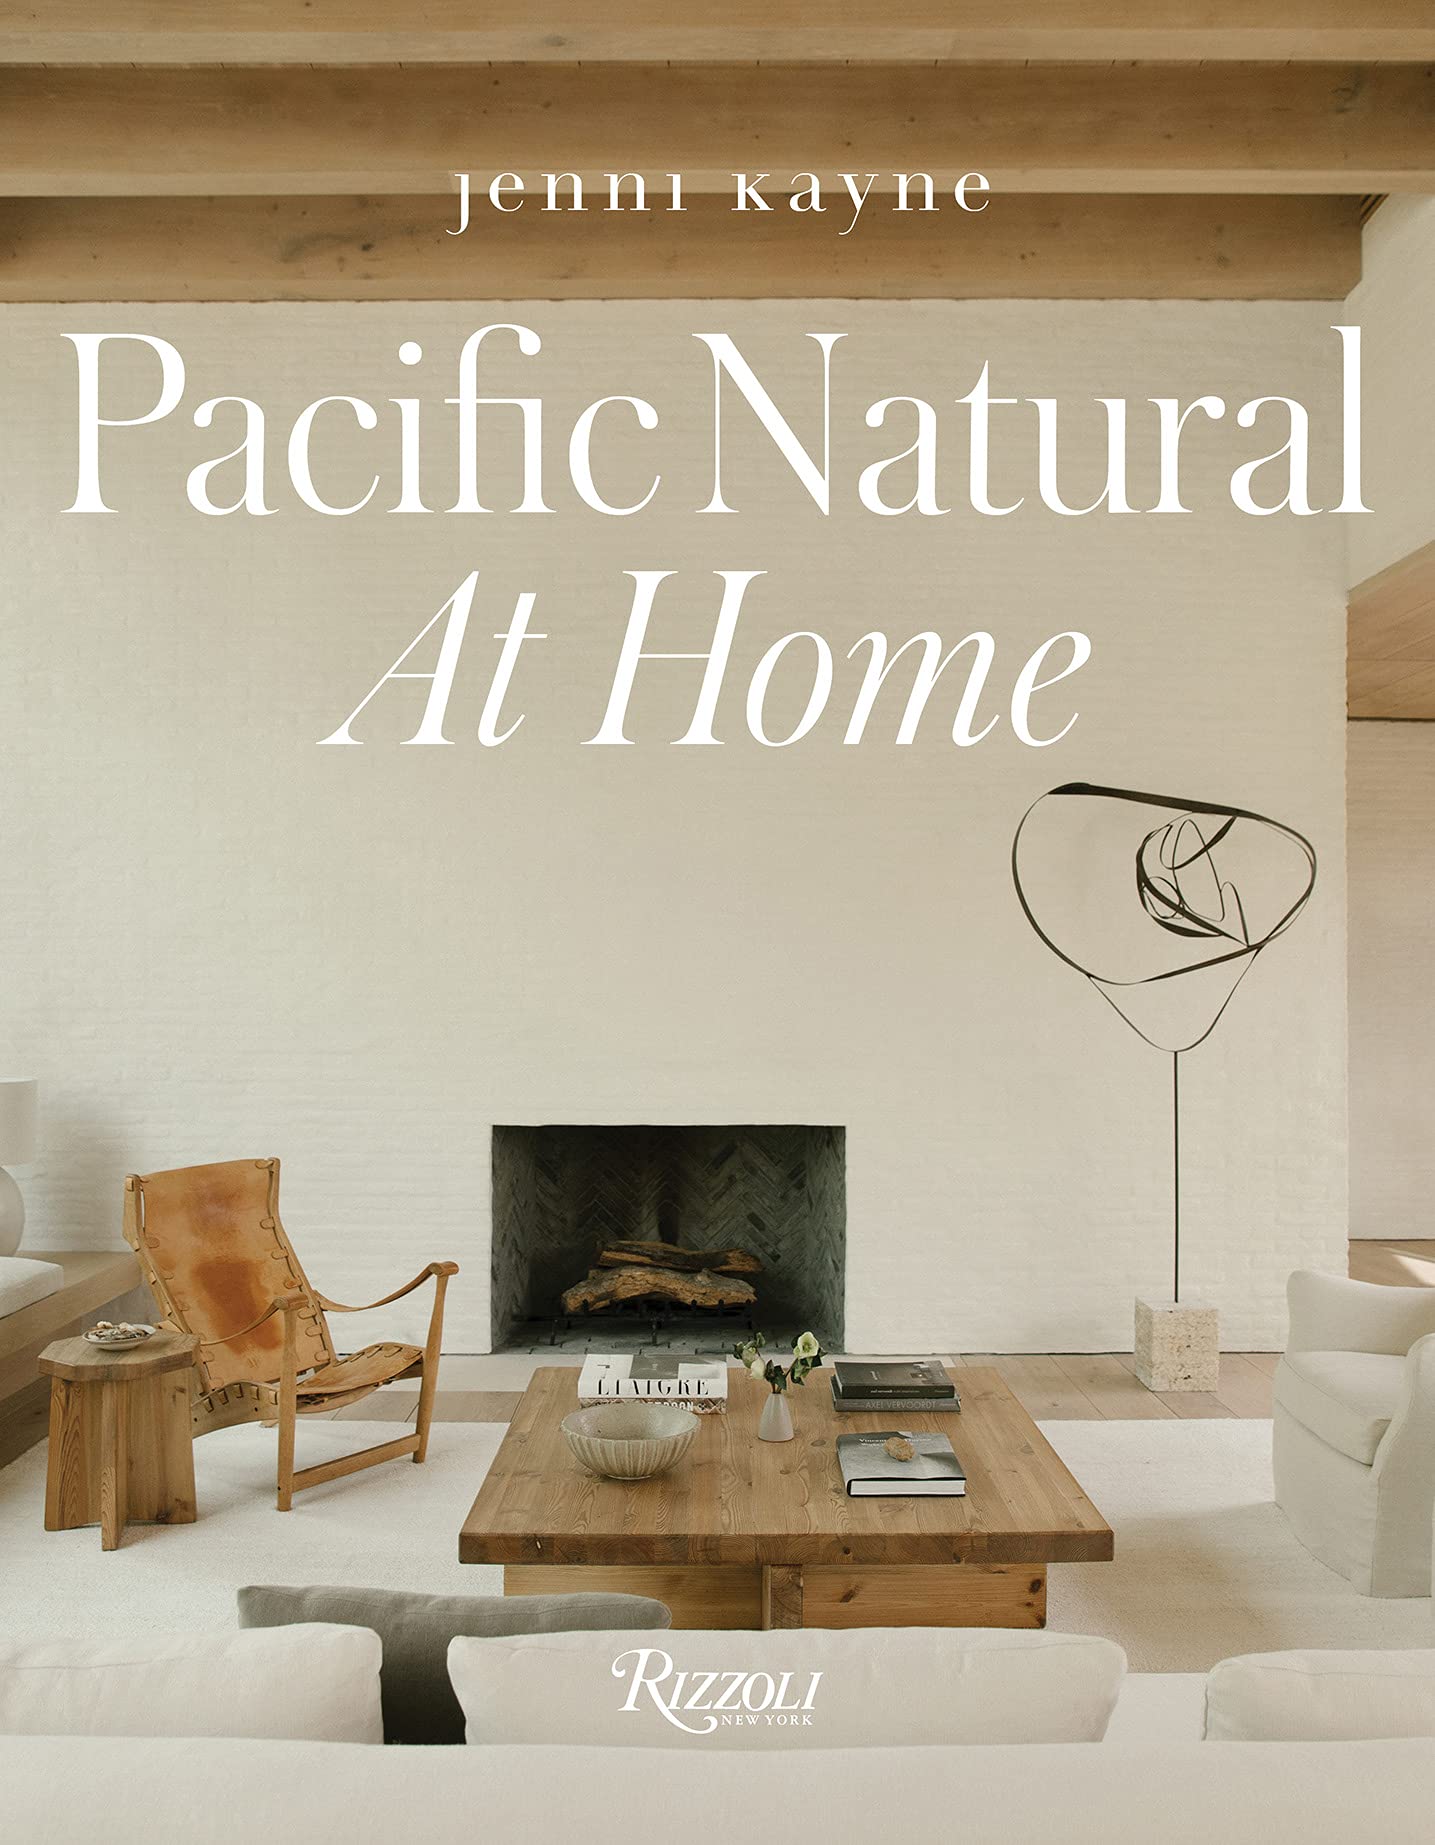 Pacific Natural at Home by Jenni Kayne - book cover (Rizzoli, 2021).